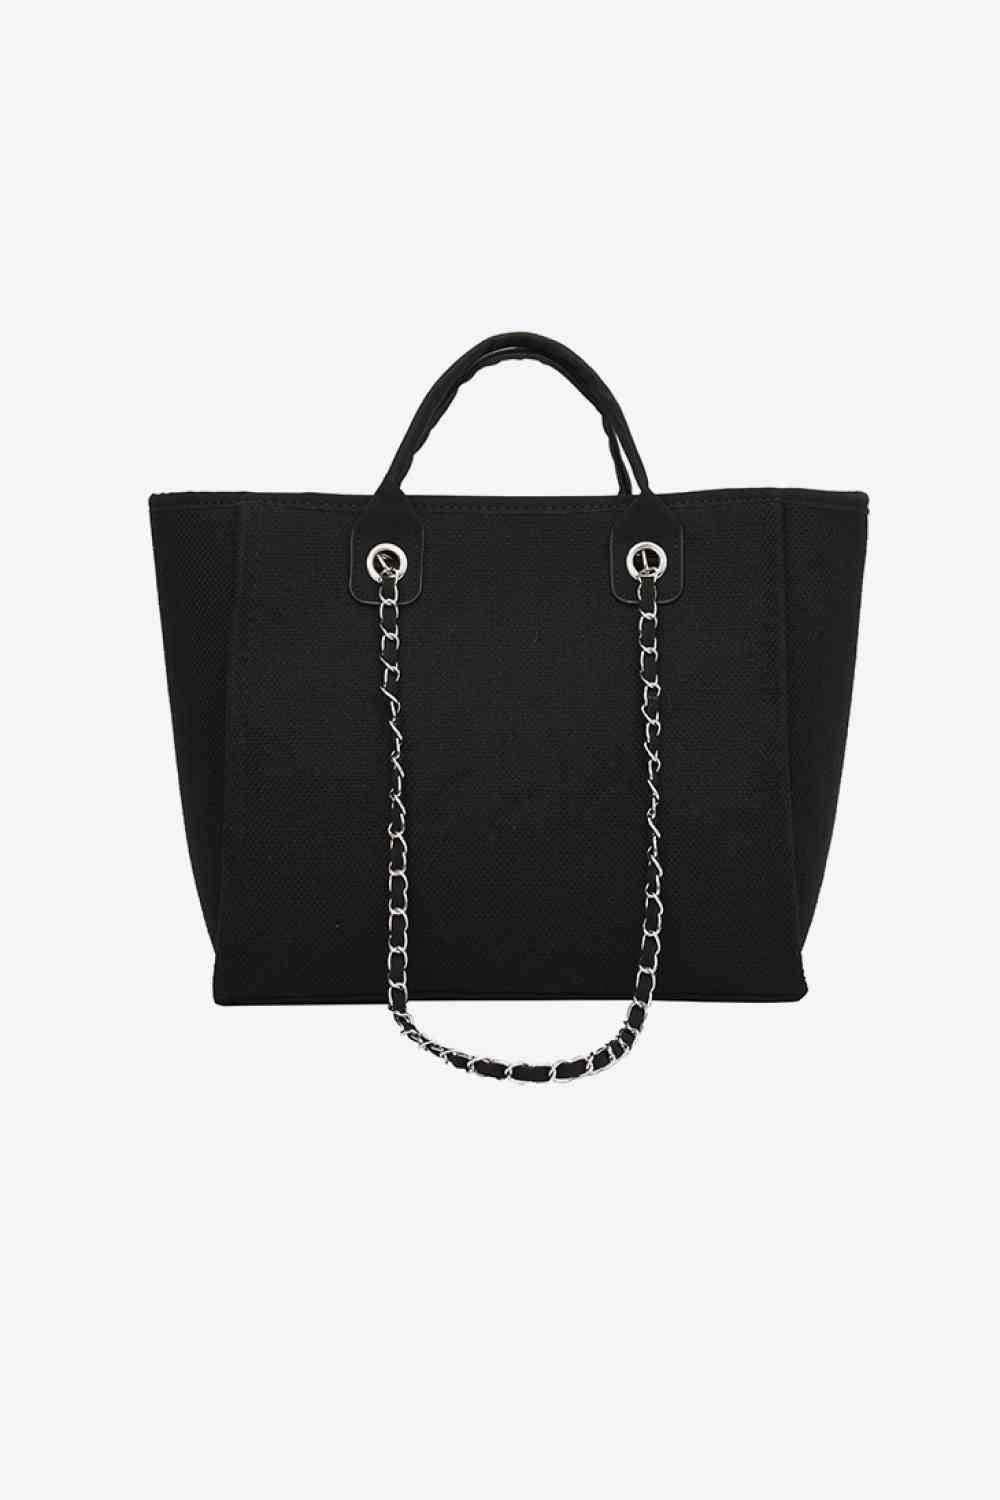 Adored Polyester Tote Bag Black One Size